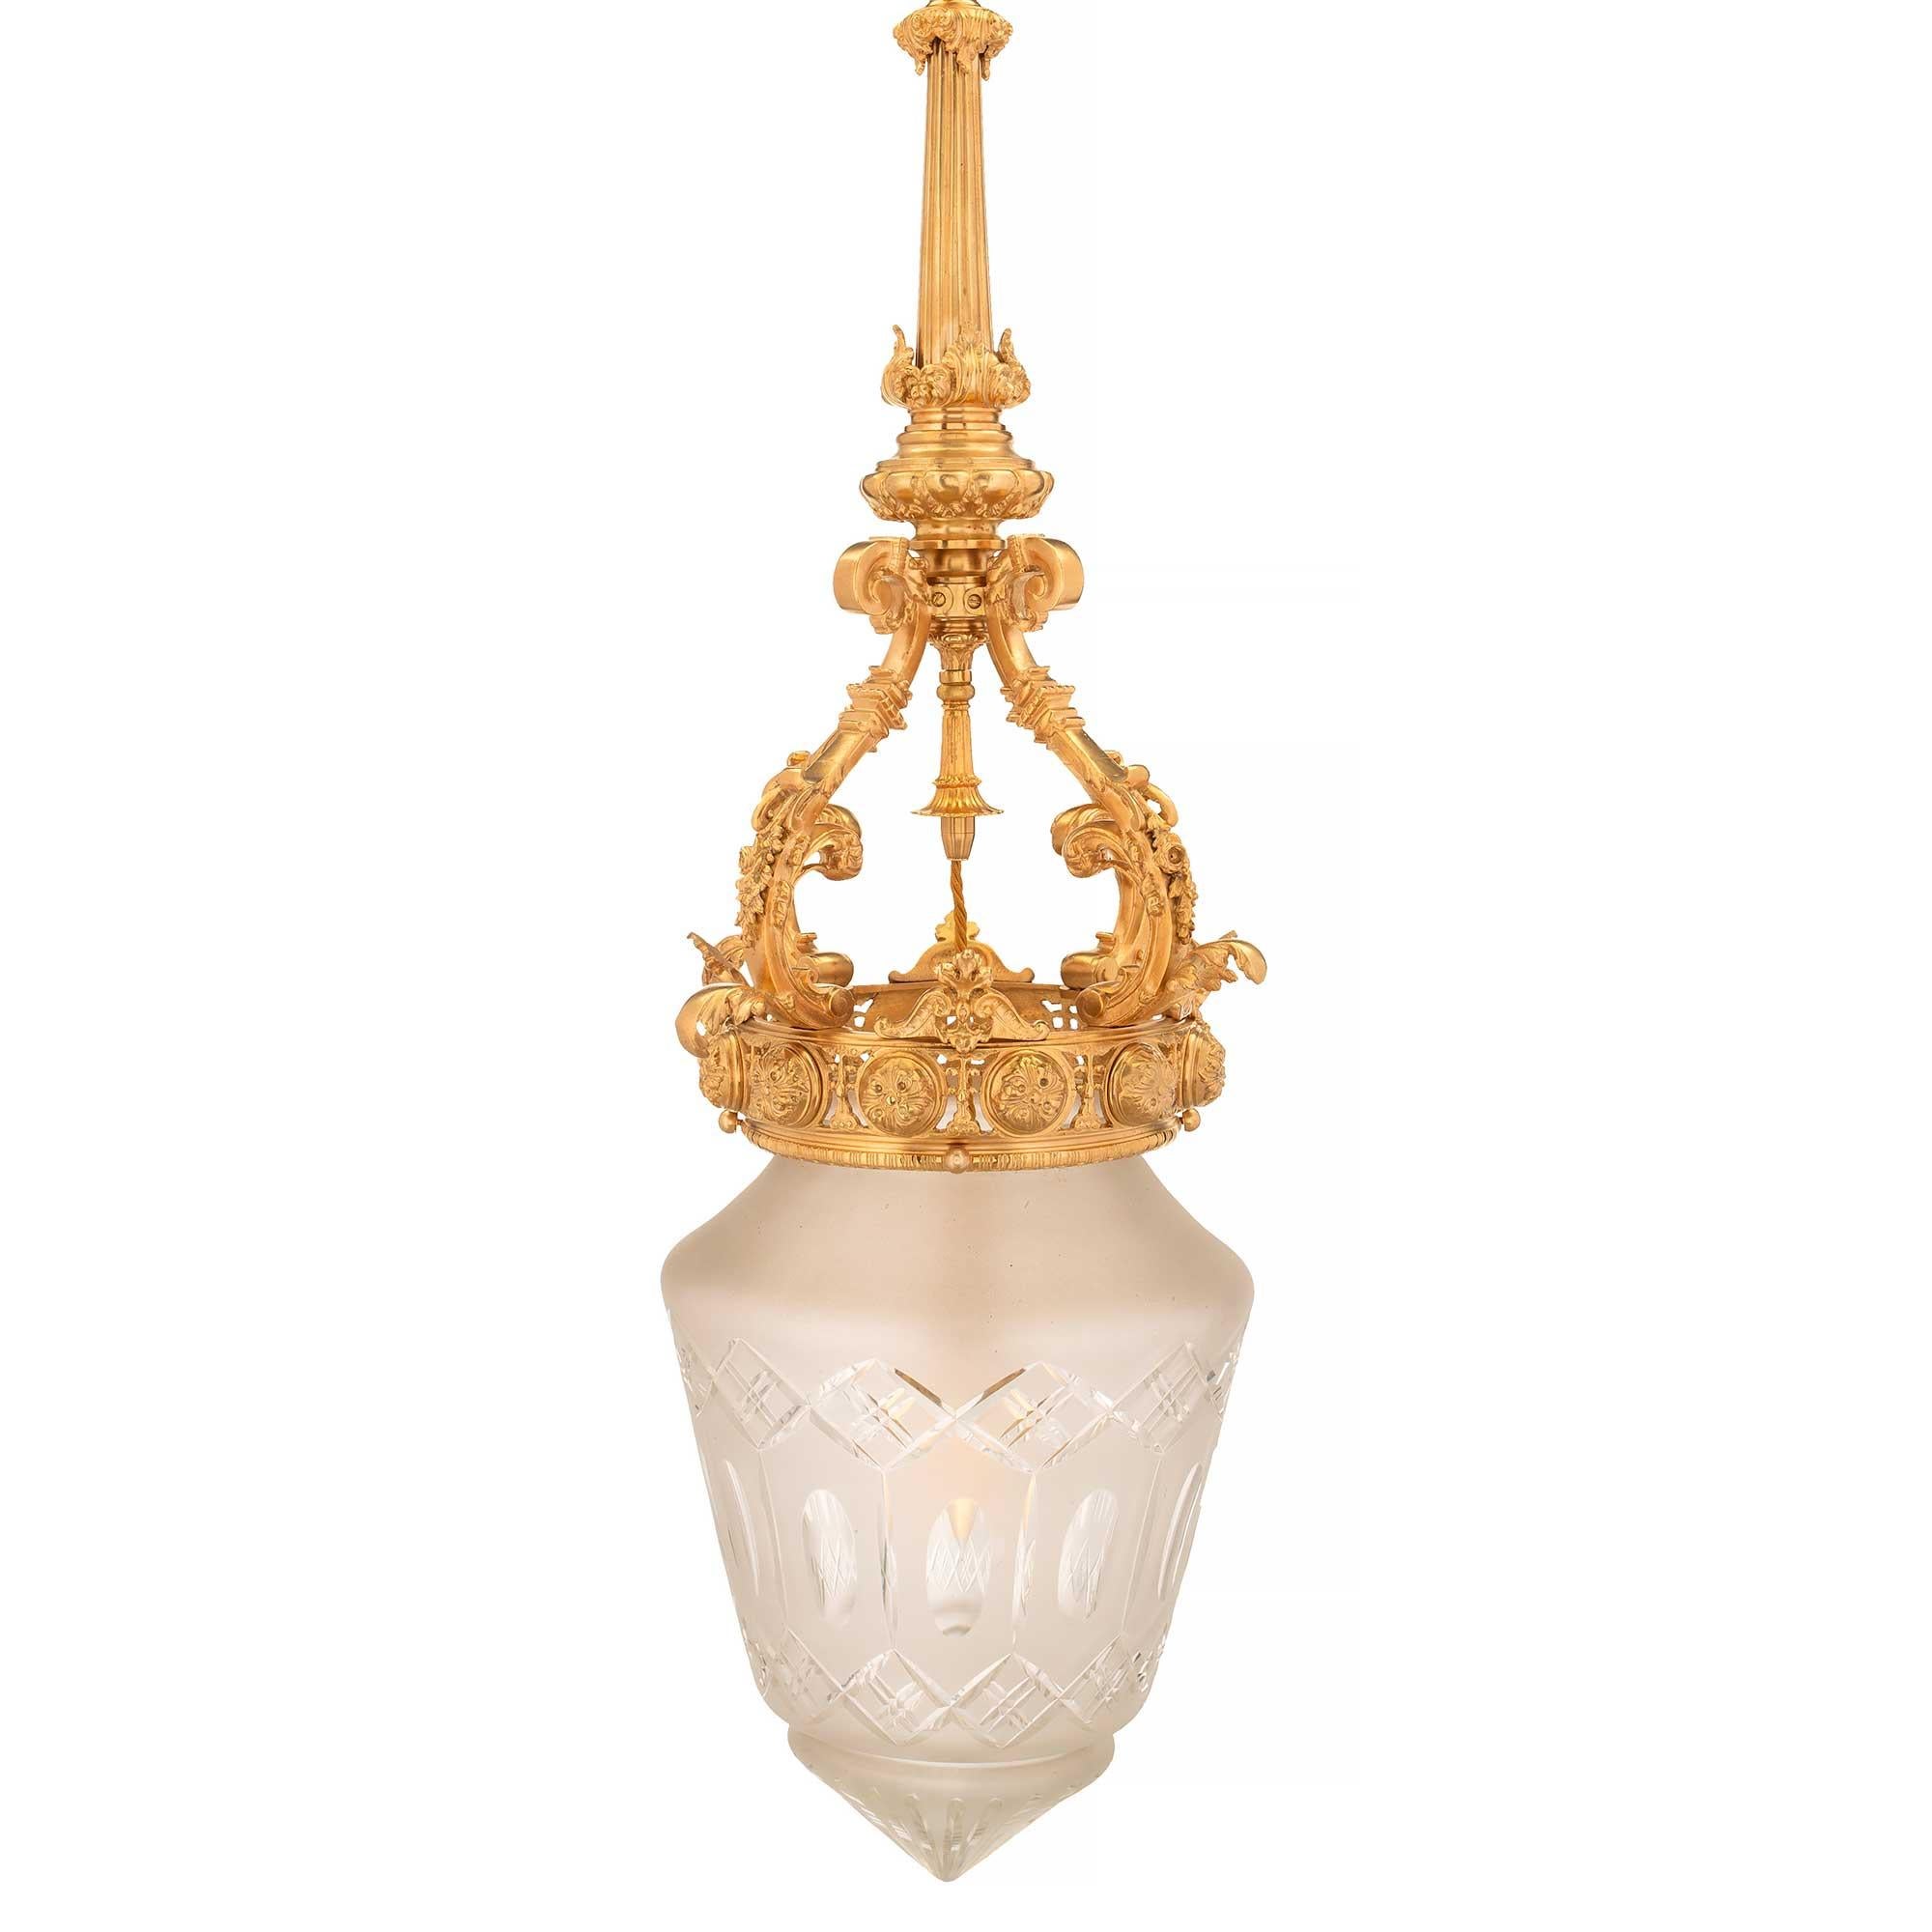 A beautiful French 19th century Louis XVI st. ormolu and frosted etched glass lantern. The lantern is centered by the elegant etched frosted glass housing which displays a fine sunburst design at the bottom and elegant interlocking and oval shapes.